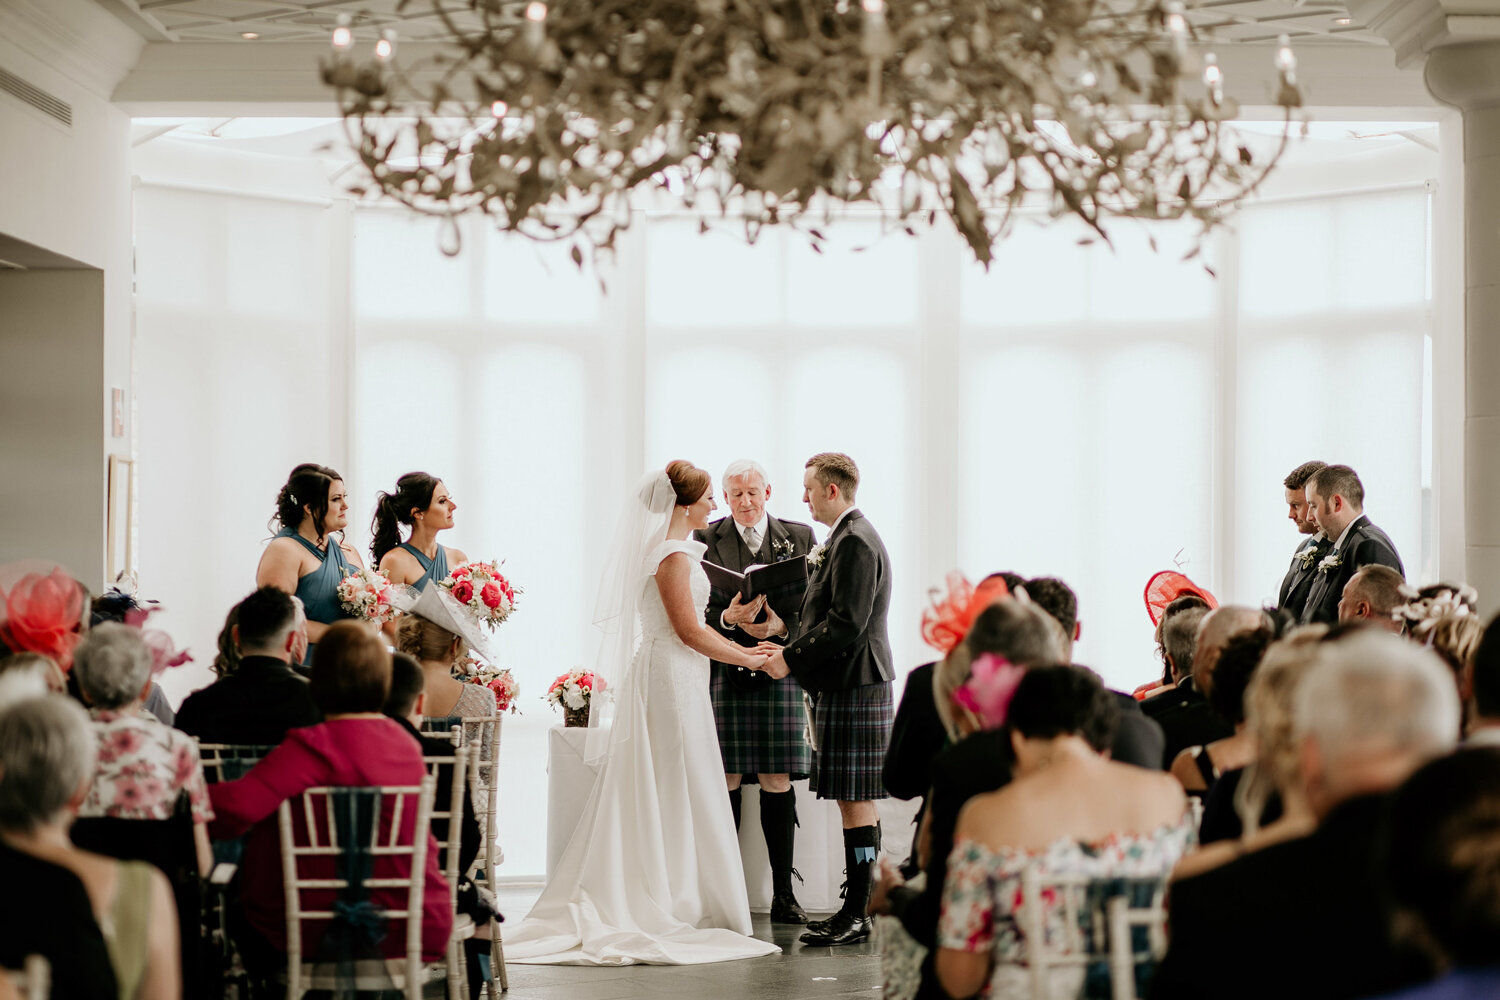 The Conservatory - Weddings at the Old Course Hotel, Golf Resort &amp; Spa